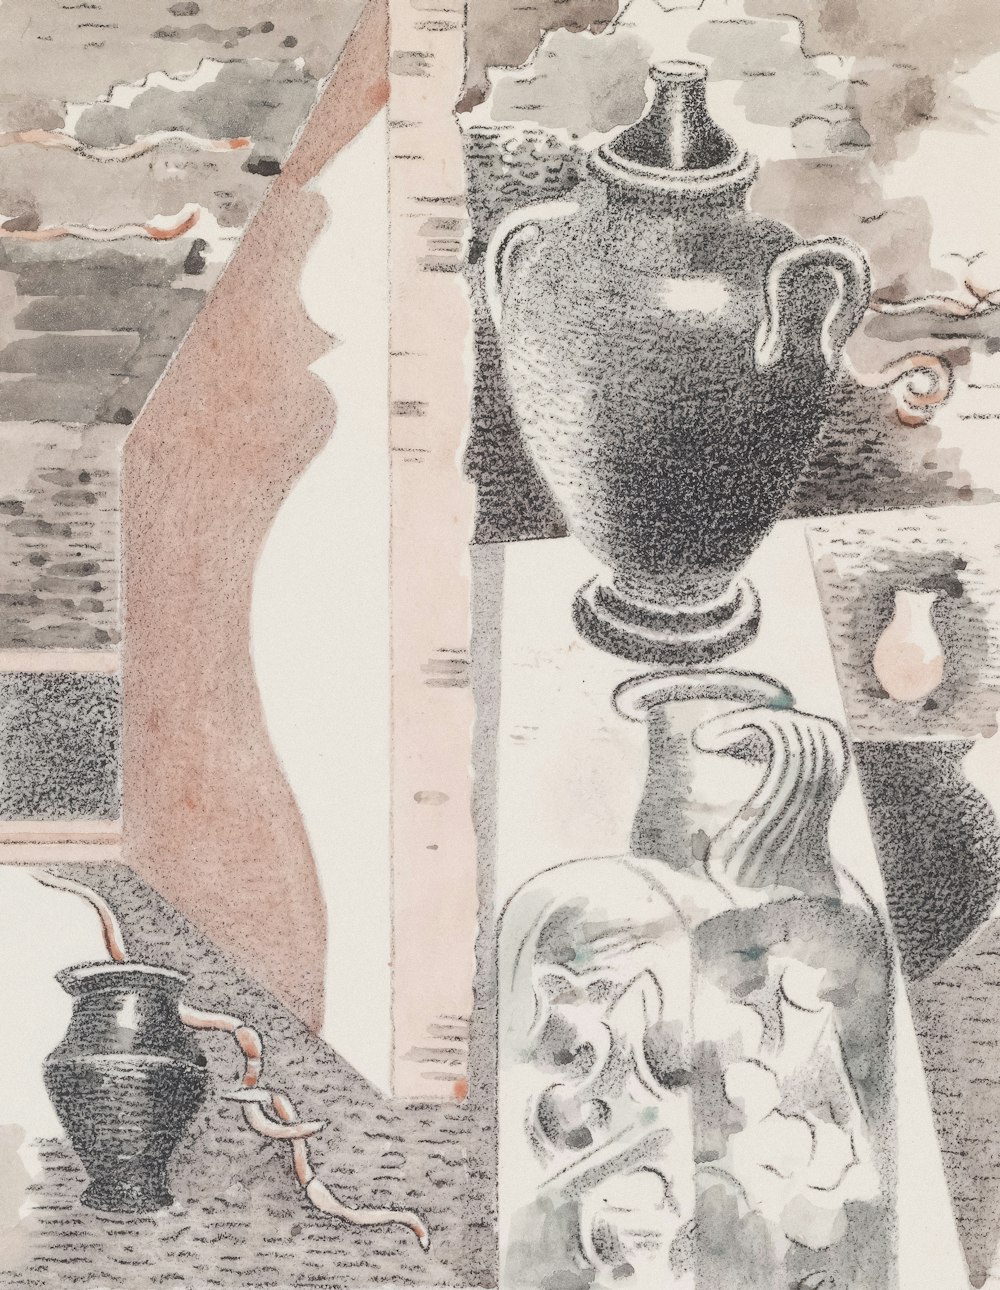 a drawing of a vase and other objects